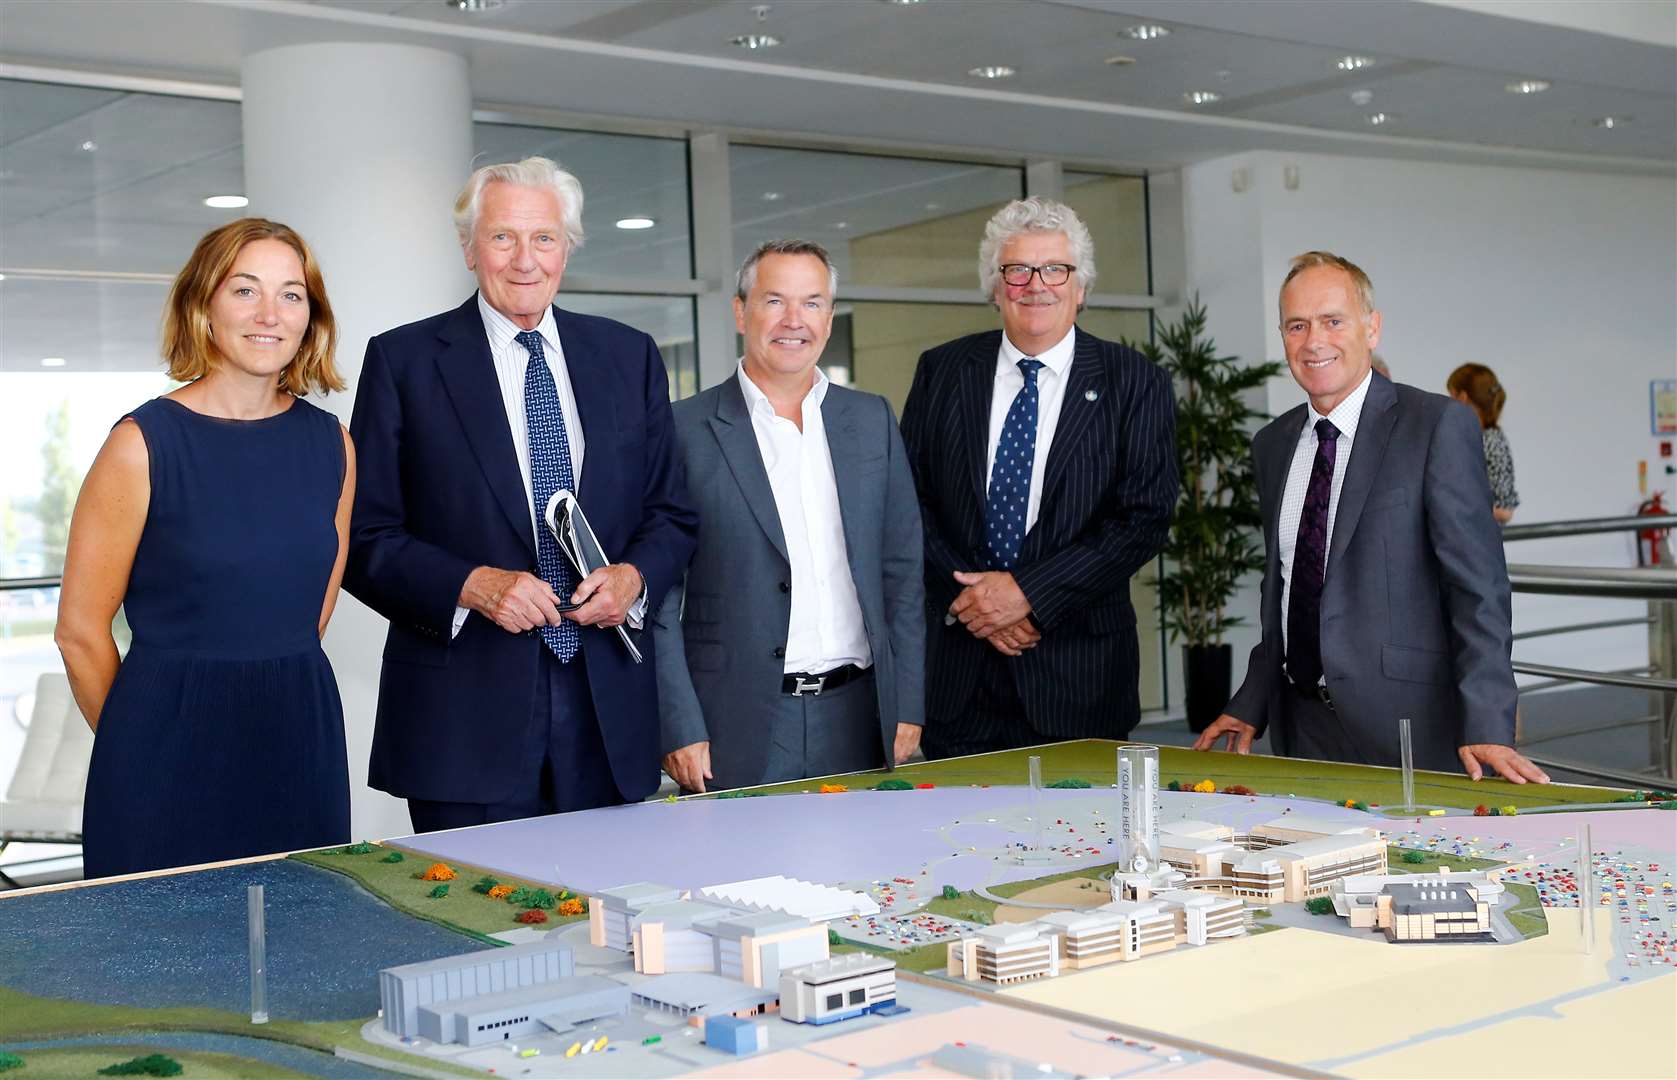 From left, Professor Sadie Morgan from dRMM Ltd, Lord Heseltine, Discovery Park owner and chief executive Chris Musgrave, Kent County Council Cllr Mark Dance and Discovery Park managing director Paul Barber